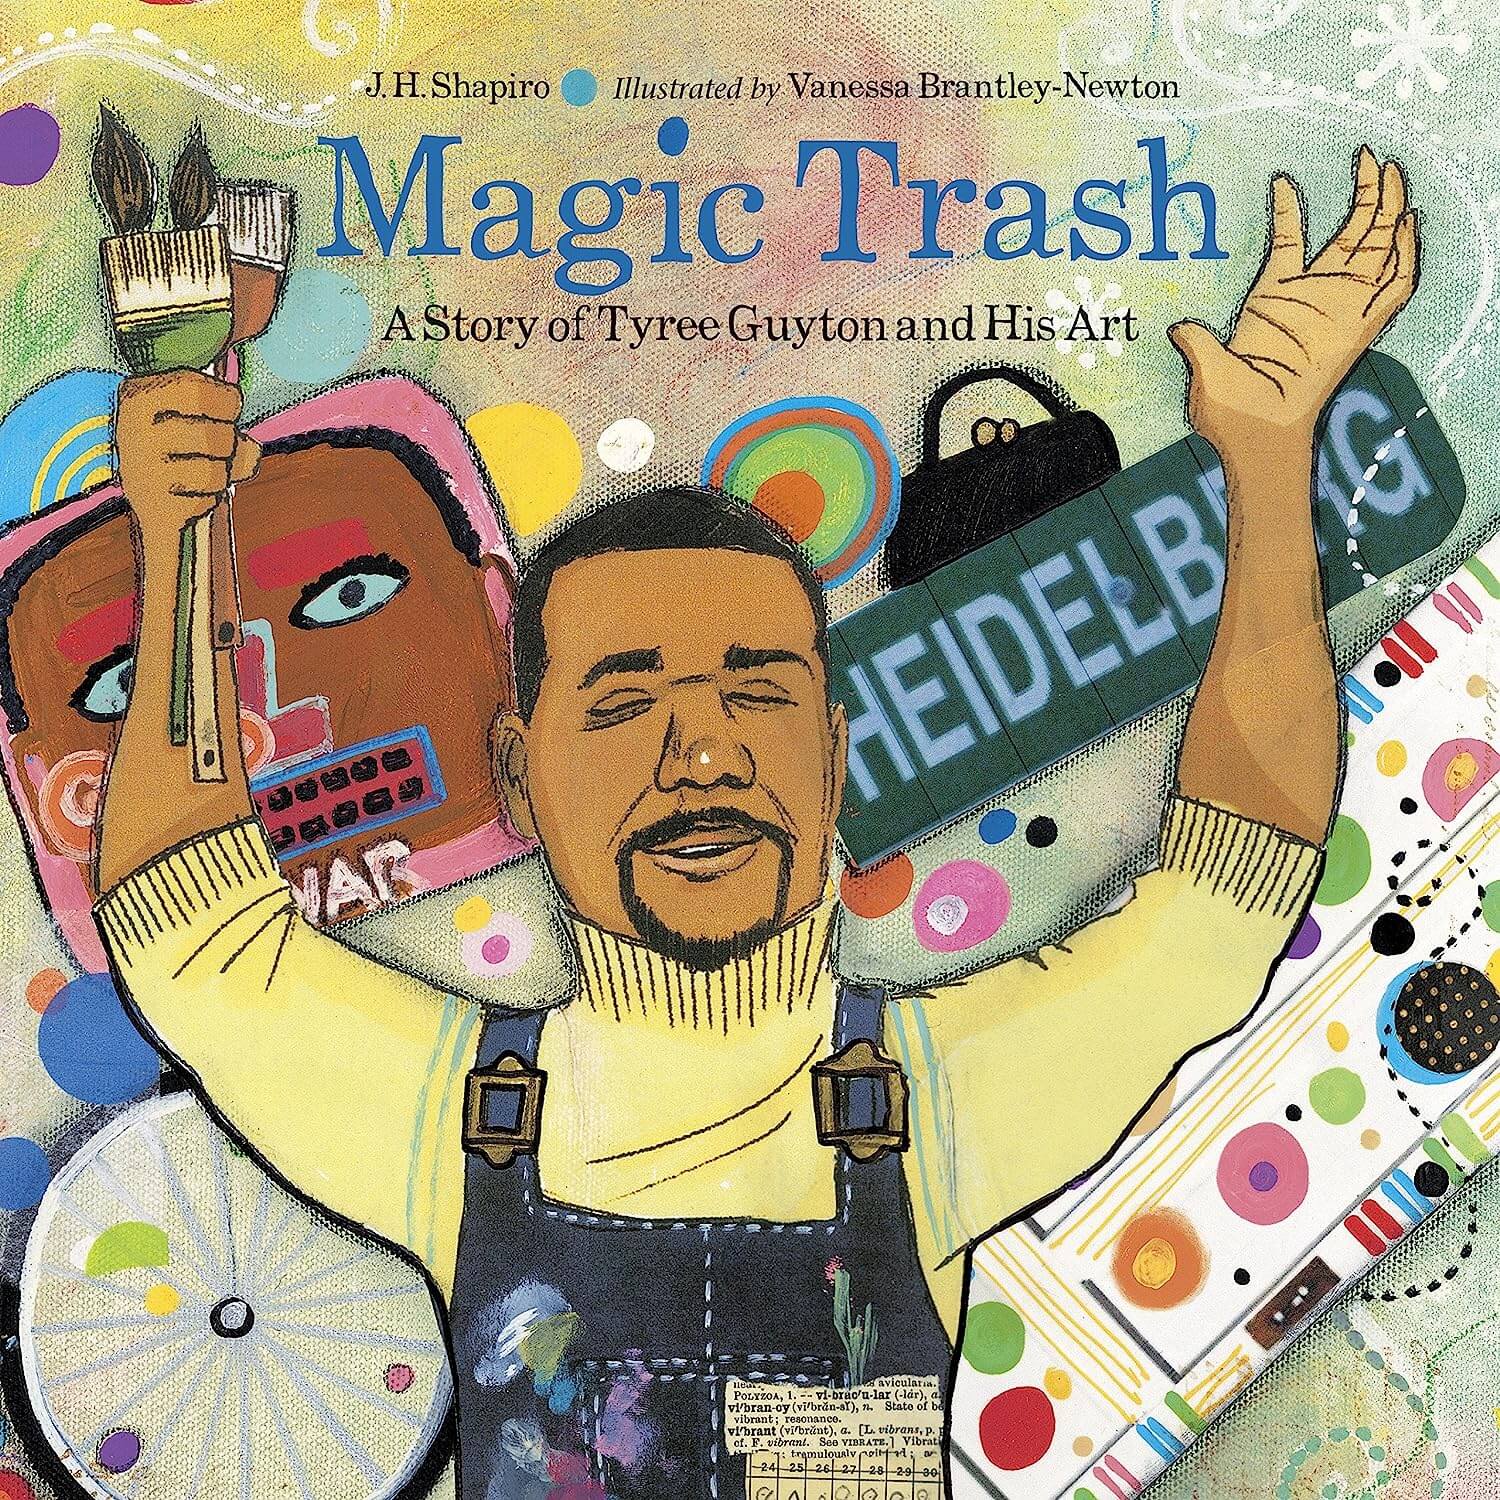 Magic Trash: The story of Tyree Guyton and his art by J.H Shapiro 